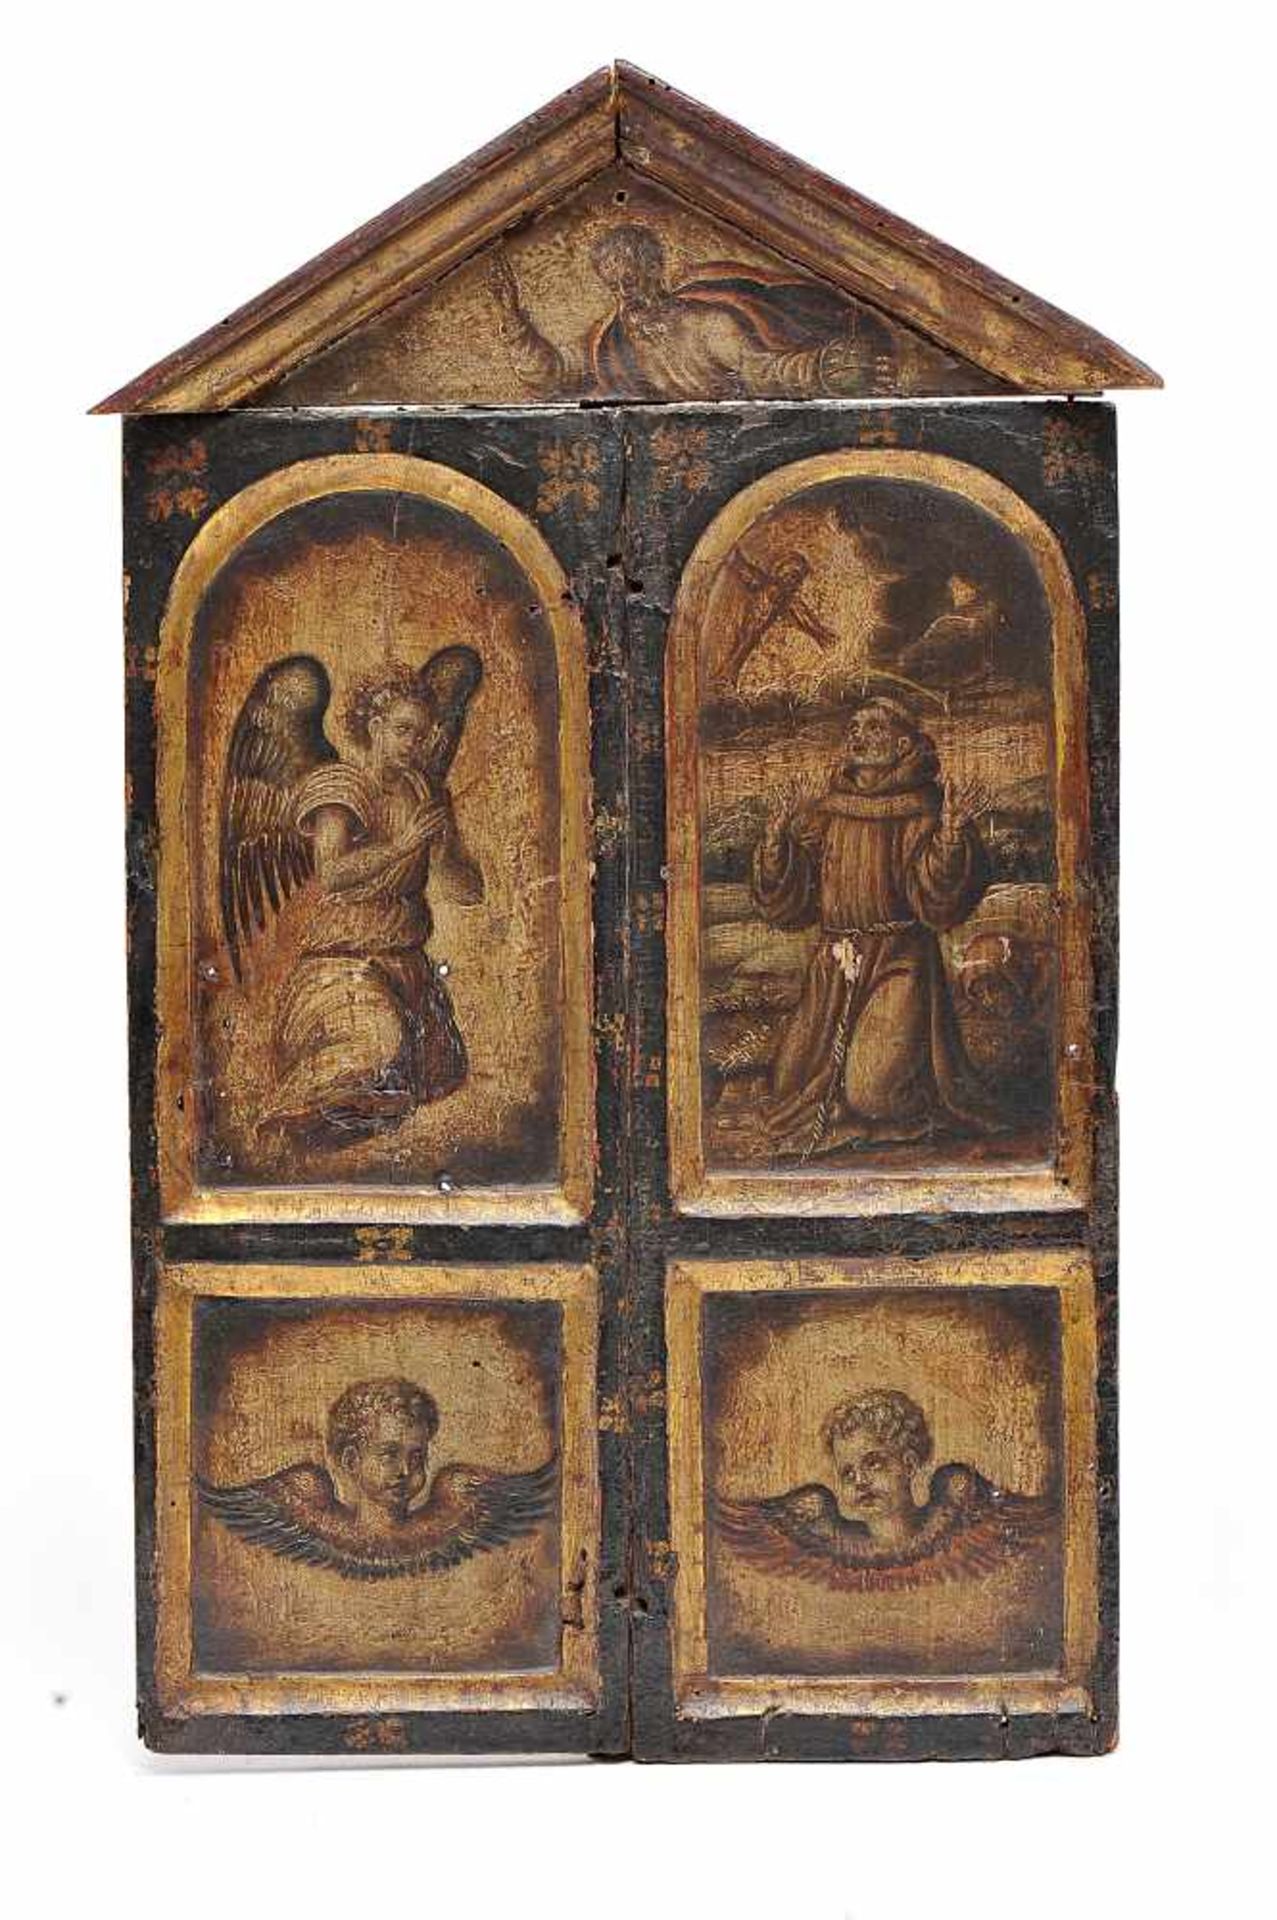 The Eternal Father, stigmatisation of Saint Francis of Assisi, Angel and two Cherubim, painted